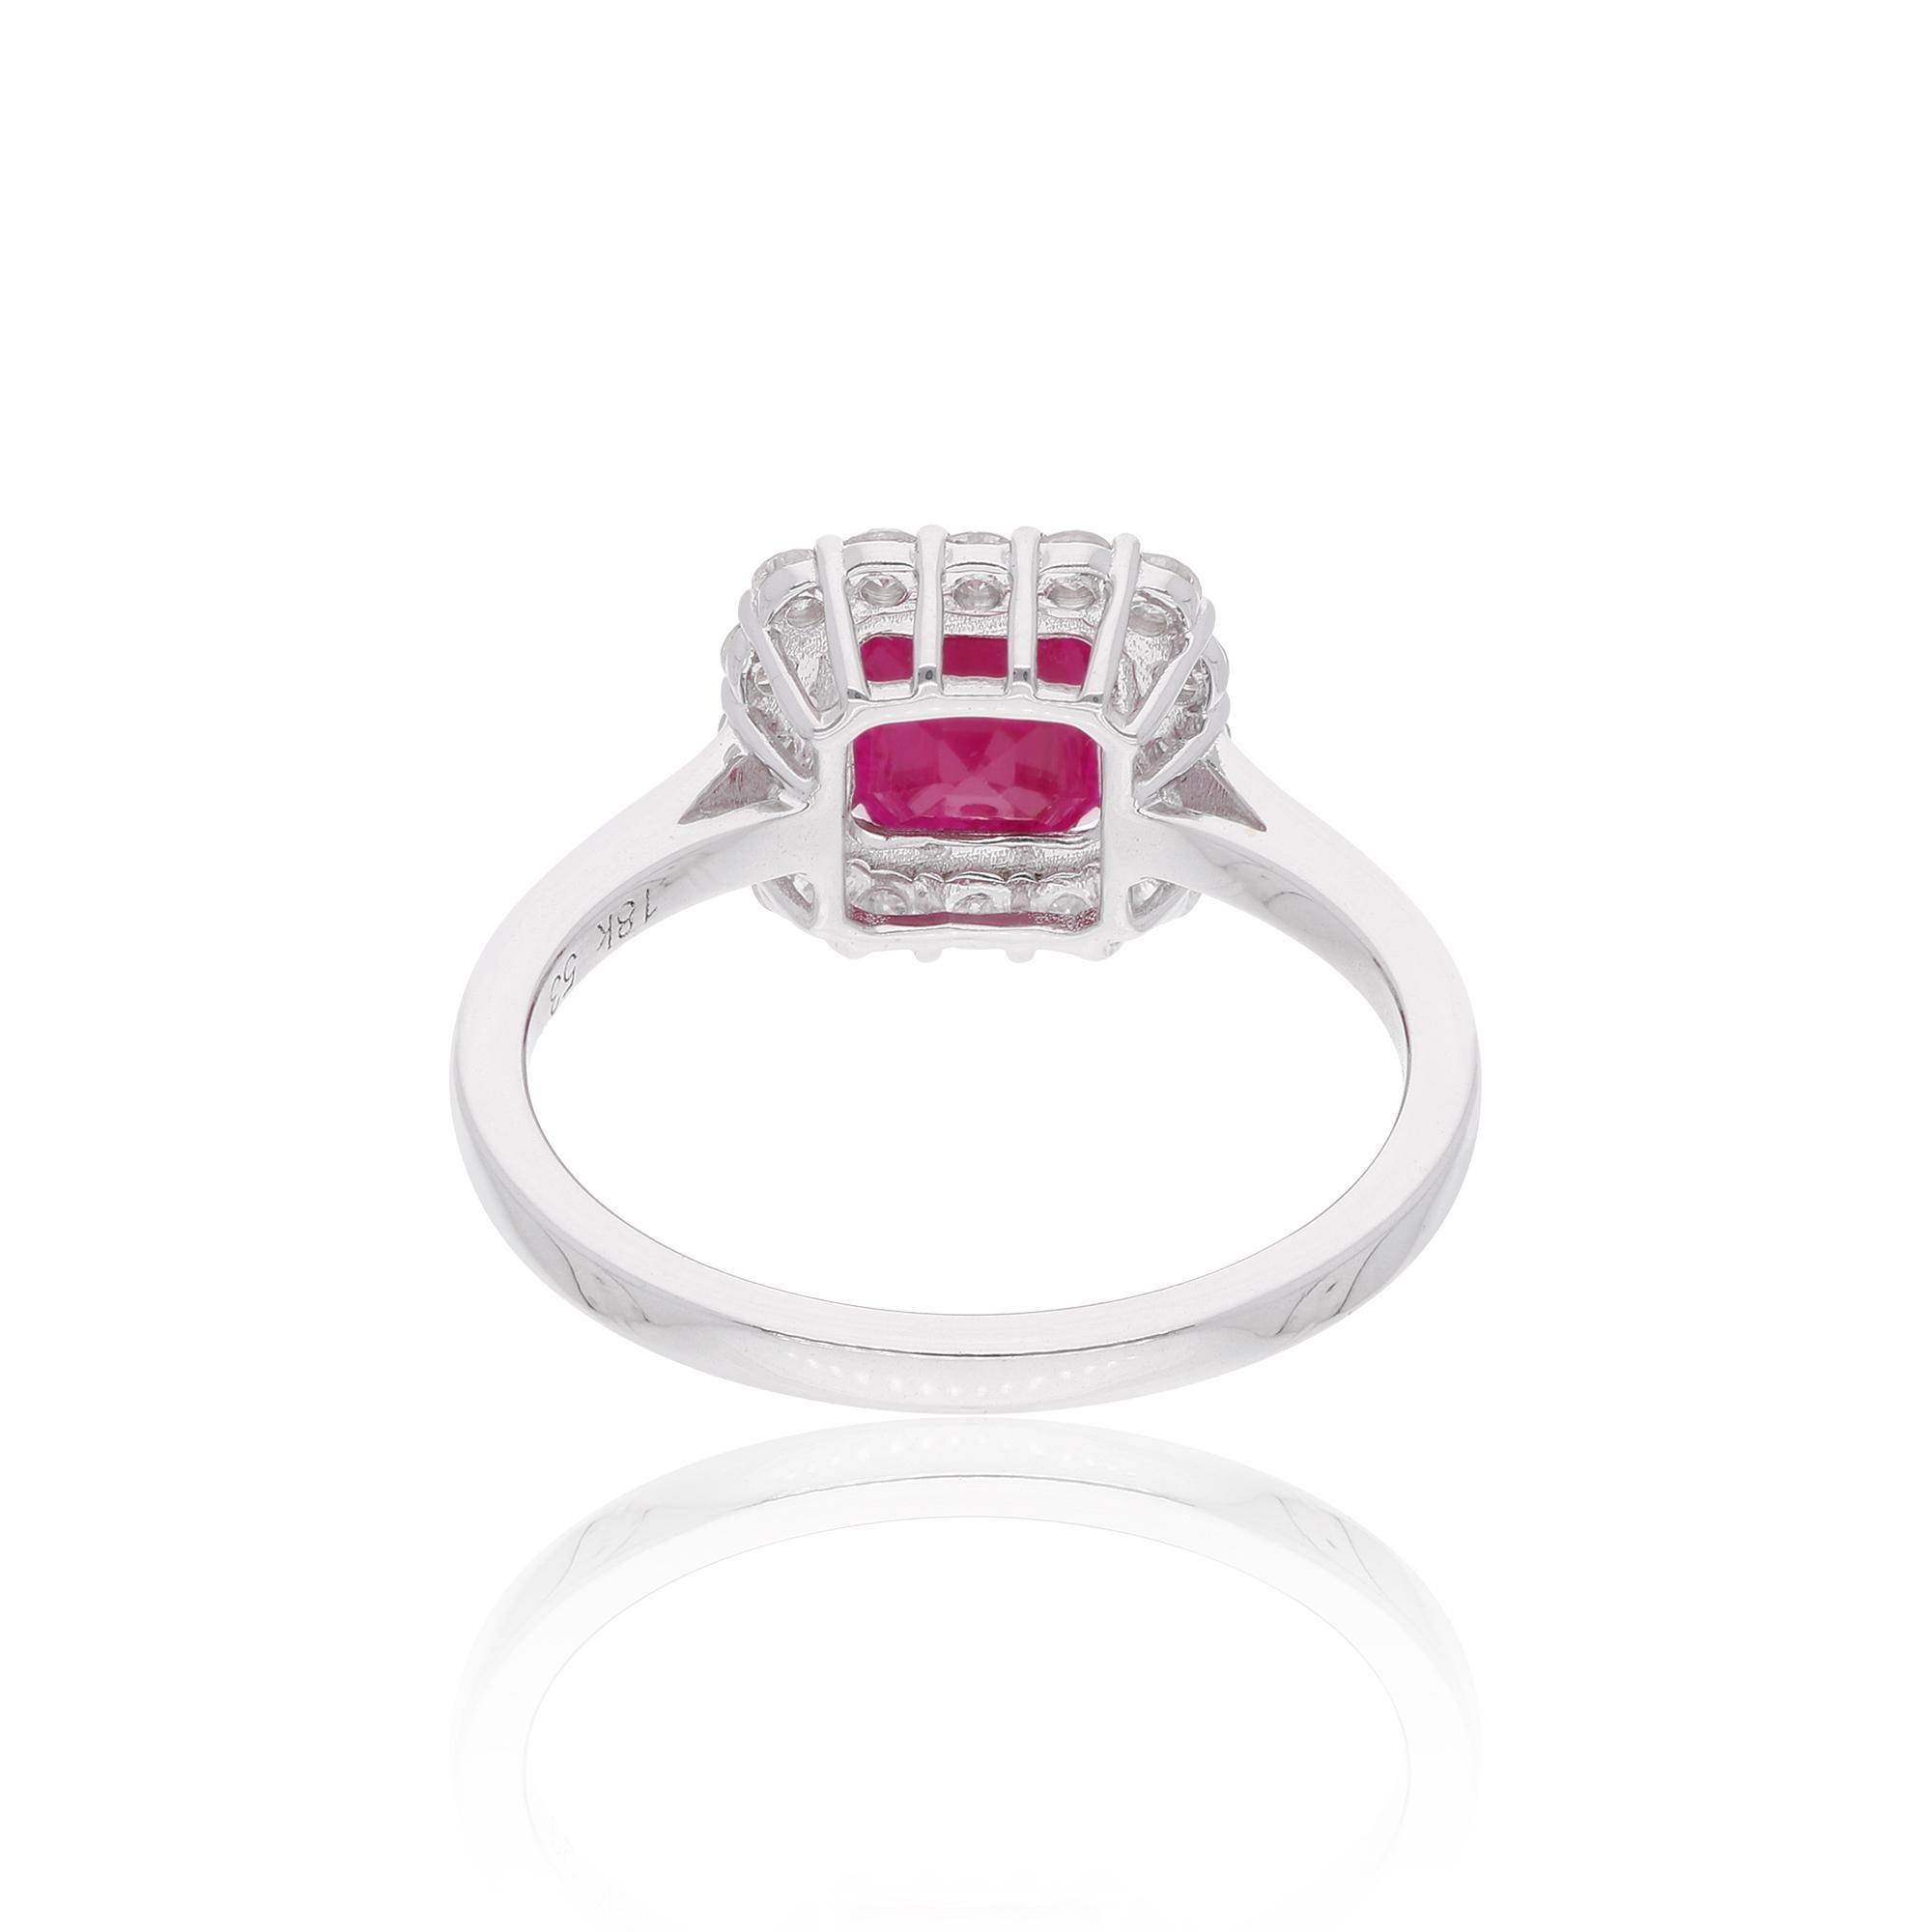 Item Code :- SER-23165 (14k)
Gross Wt. :- 287 gm
14k Solid White Gold Wt. :- 2.42 gm
Natural Diamond Wt. :- 0.35 Ct. 
Ruby Wt. :- 1.88 Ct.
Ring Size :- 7 US & All size available

✦ Sizing
.....................
We can adjust most items to fit your